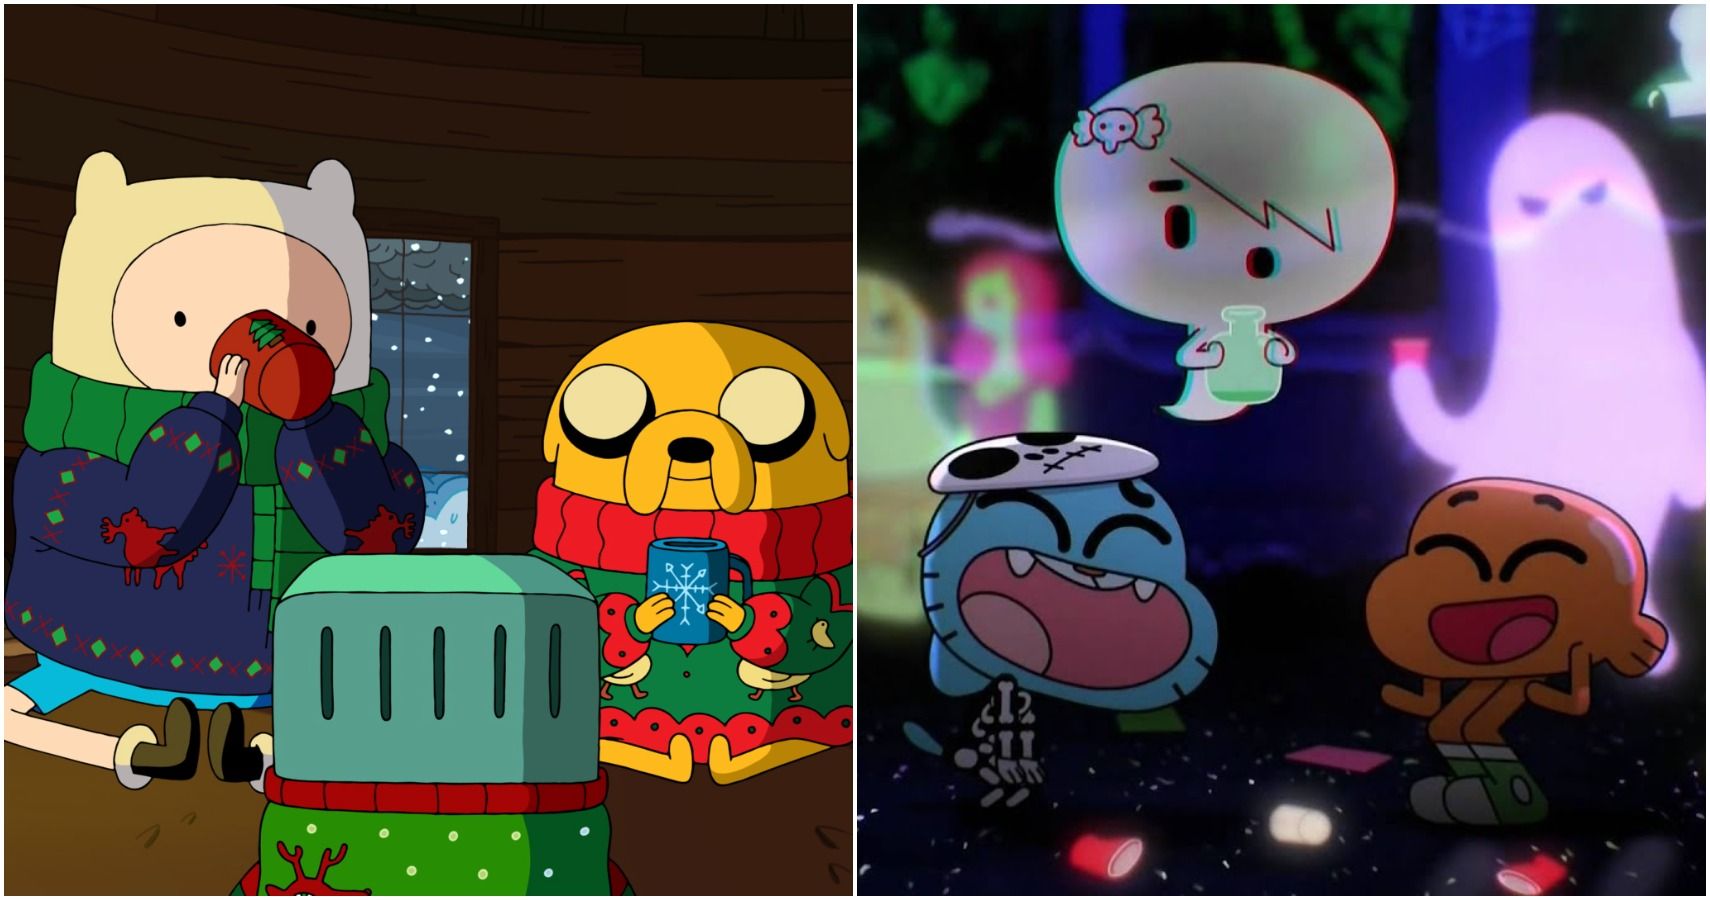 Adventure Time and Gumball